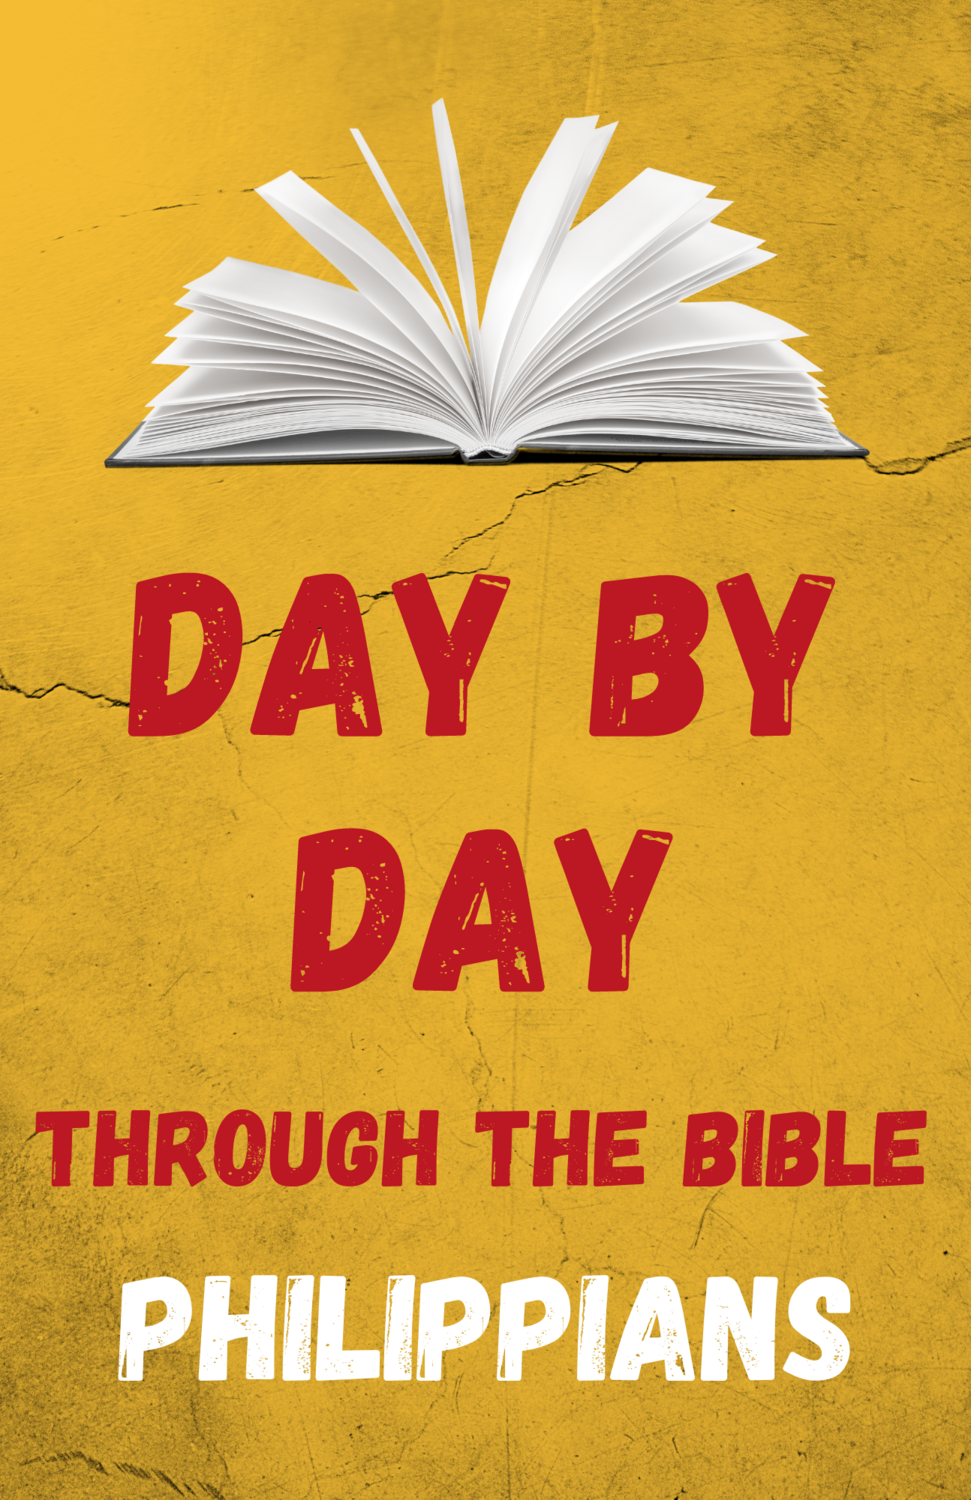 Day By Day Through the Bible: Four Days in Philippians - Digital Download